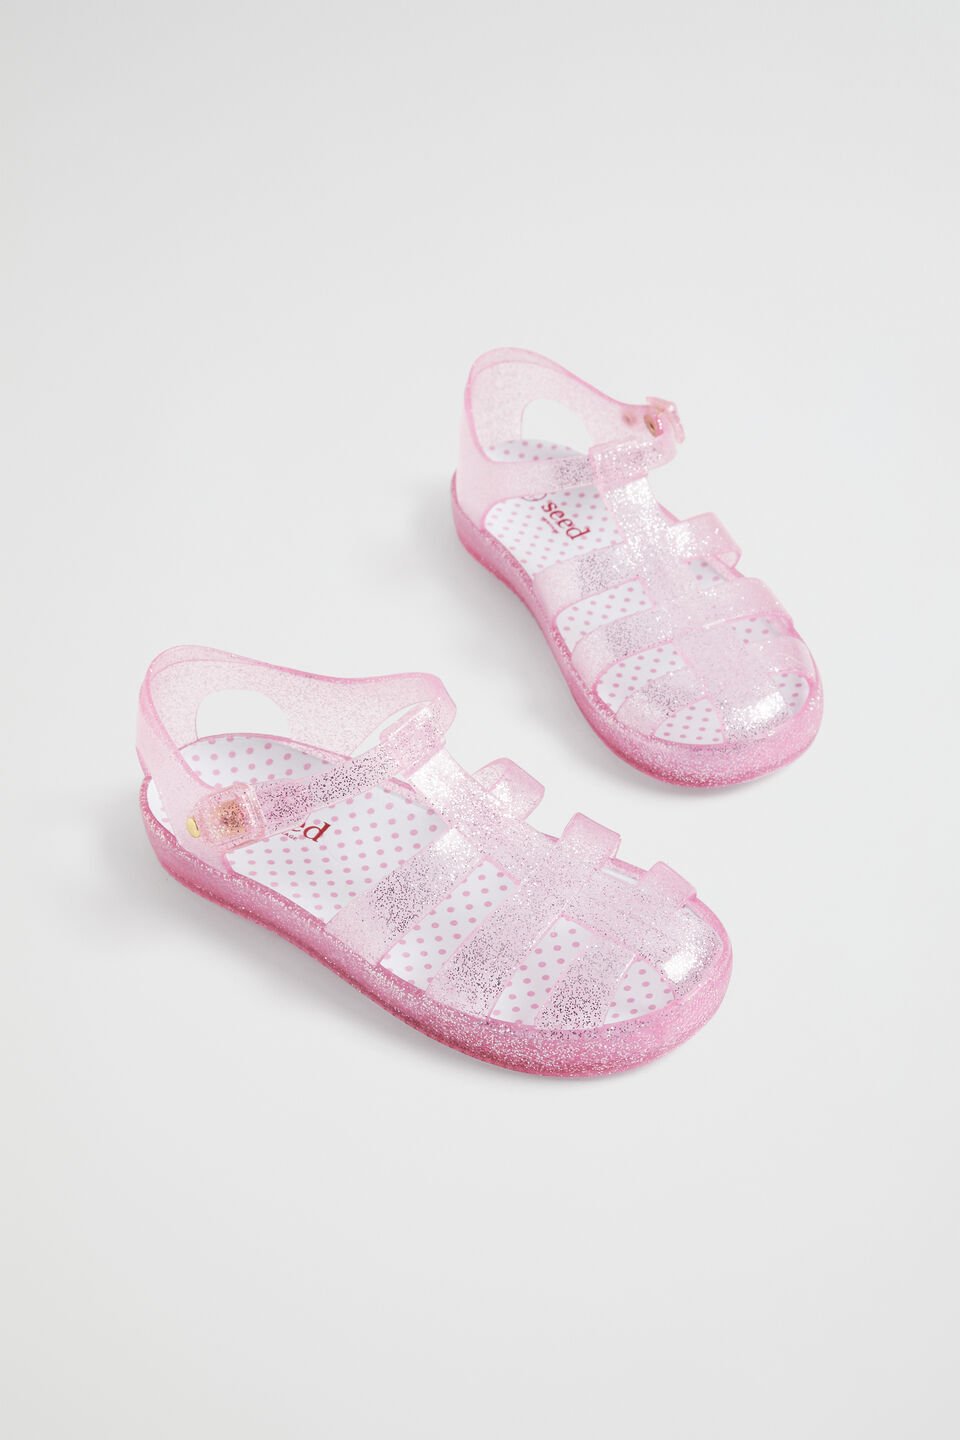 Glitter Cage Jelly Sandal  Pink